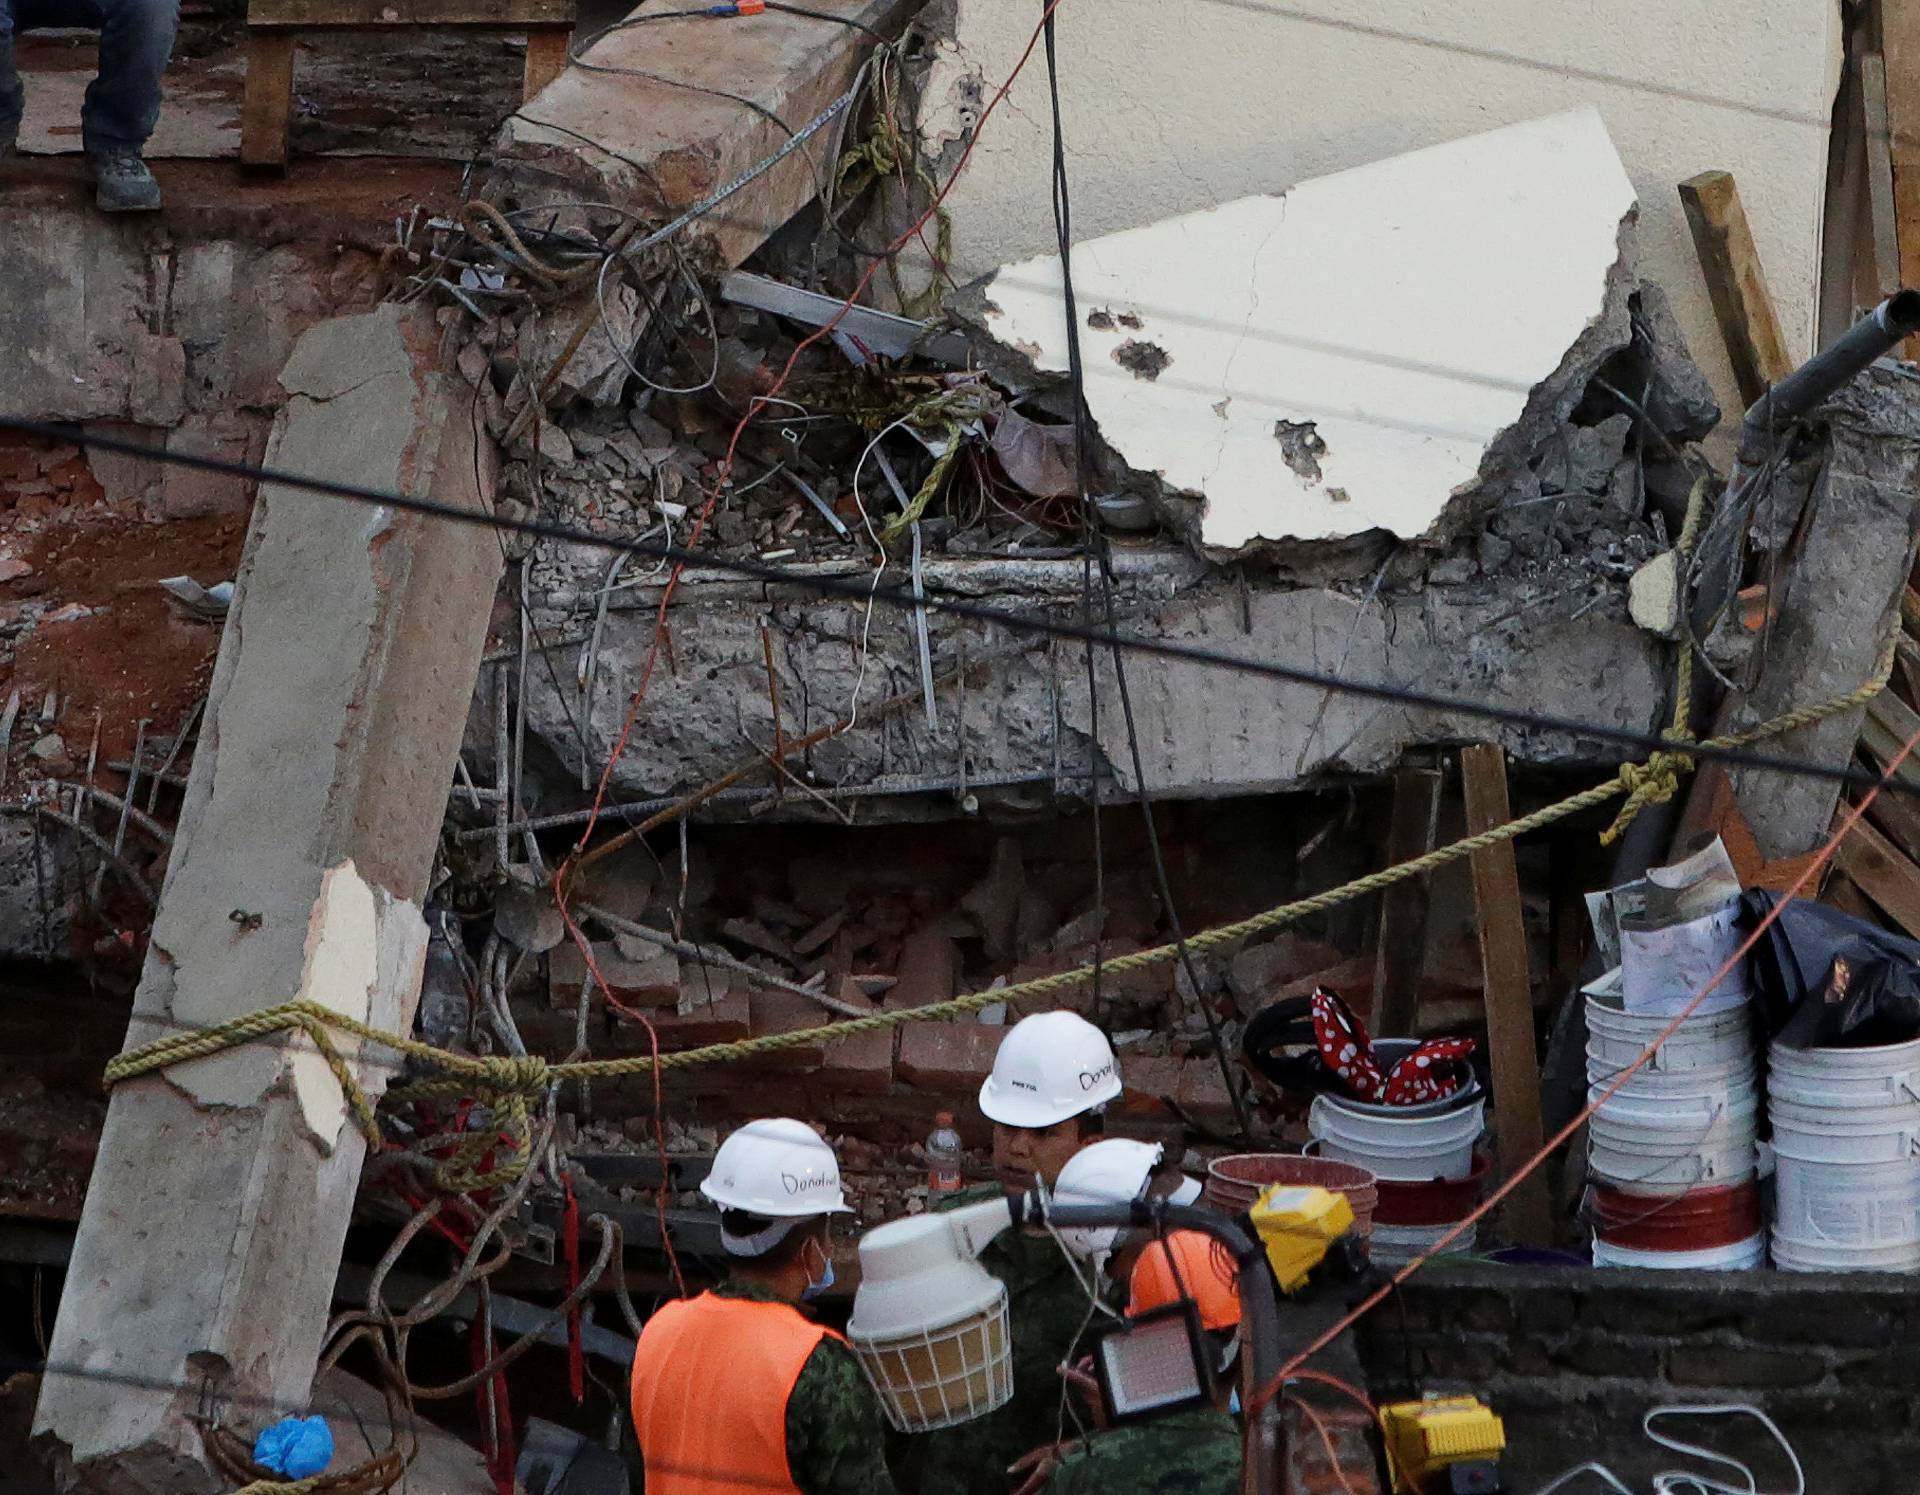 Rescue workers stand next to parts of a collapsed school building during a search for students at the Enrique Rebsamen school after an earthquake in Mexico City